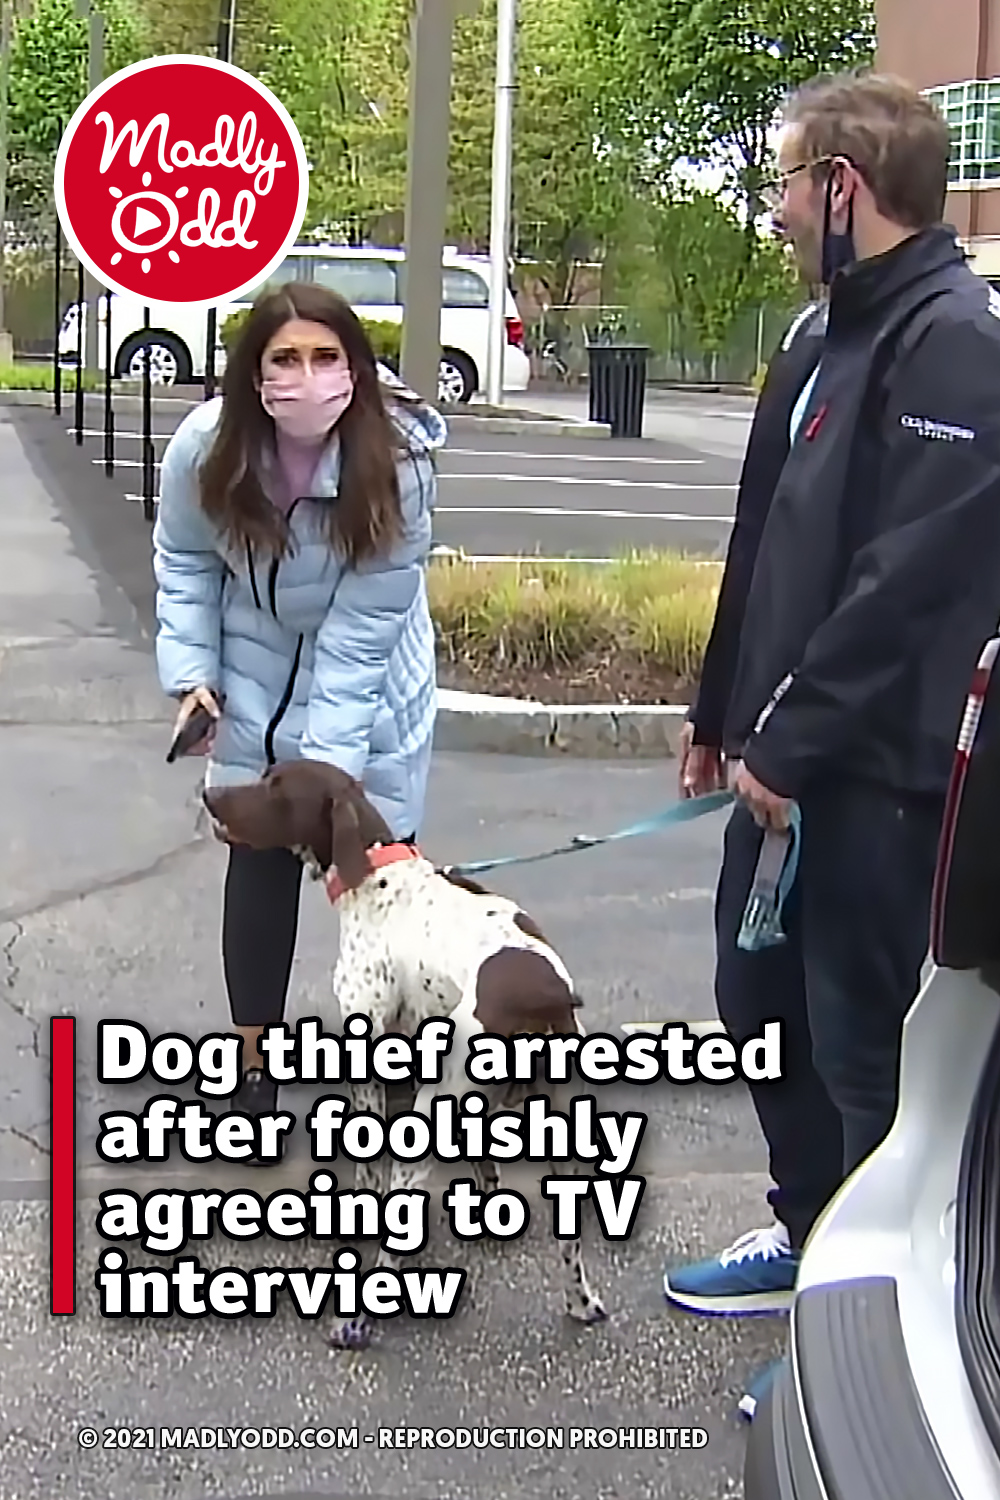 Dog thief arrested after foolishly agreeing to TV interview